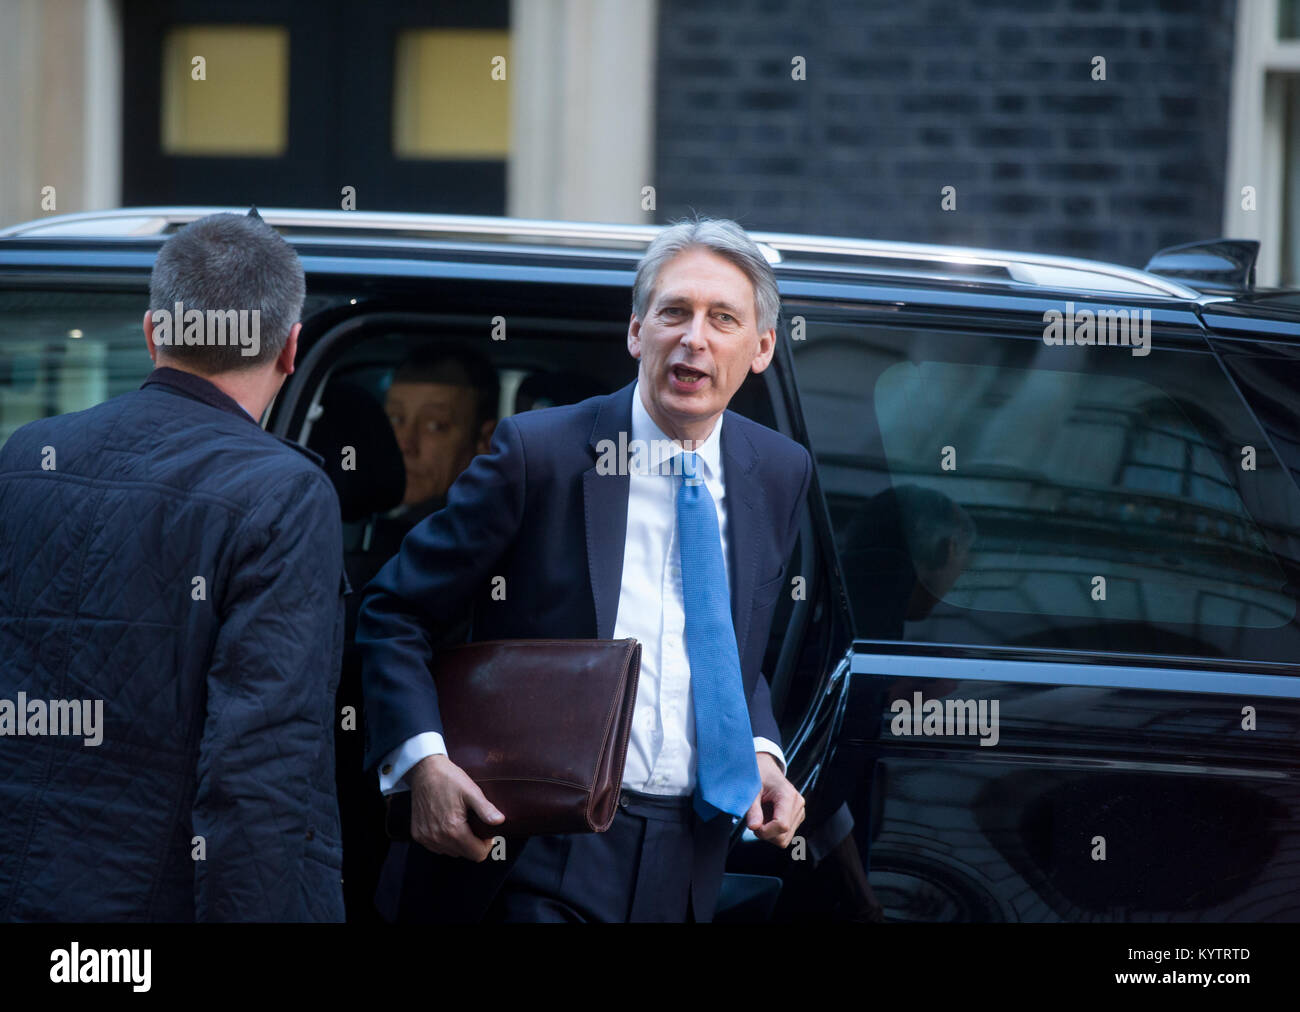 Chancellor of the Exchequer, Philip Hammond, arrives at Downing Street Stock Photo